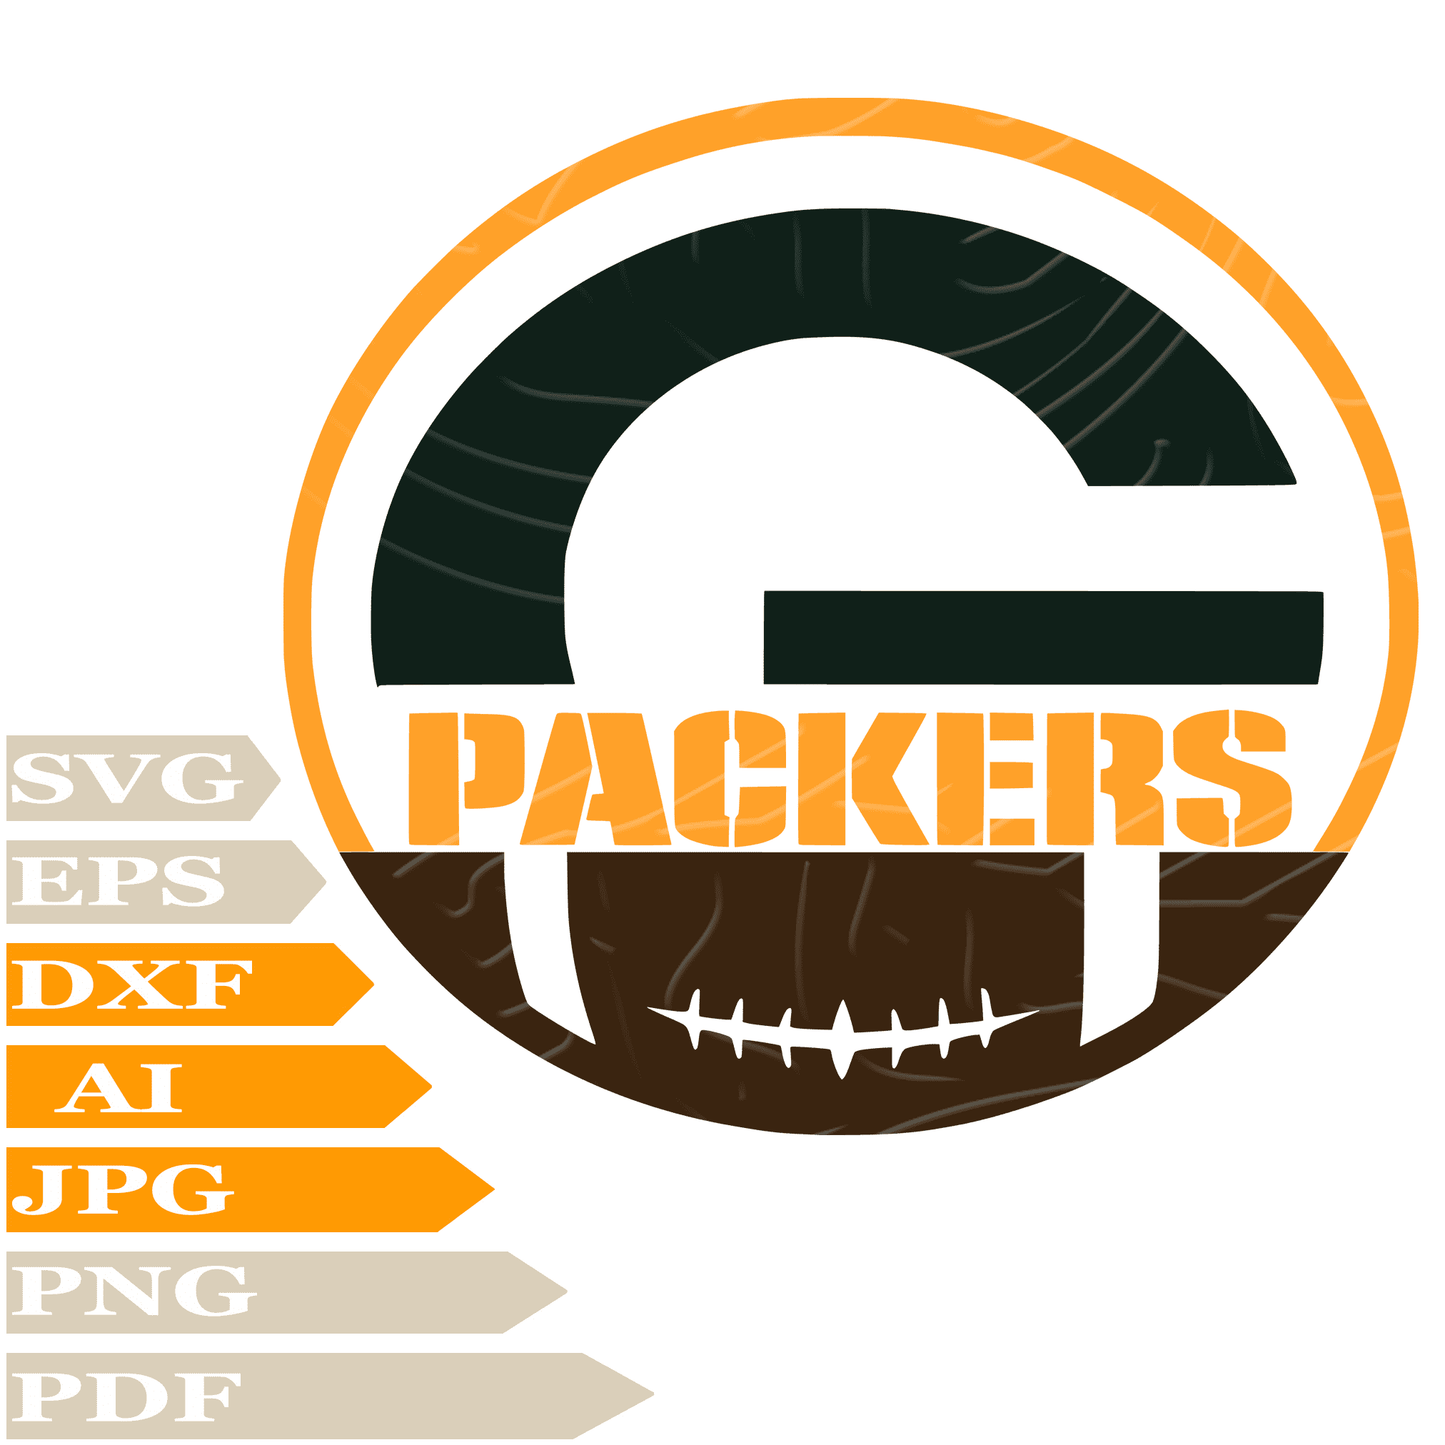 Packers SVG-Packers Football Logo SVG File-Packers Football Team Mascot Drawing SVG-Packers Logo Vector Clip art-Image Cut Files-Illustration-PNG-For Cricut -Instant download-For Shirts-Silhouette